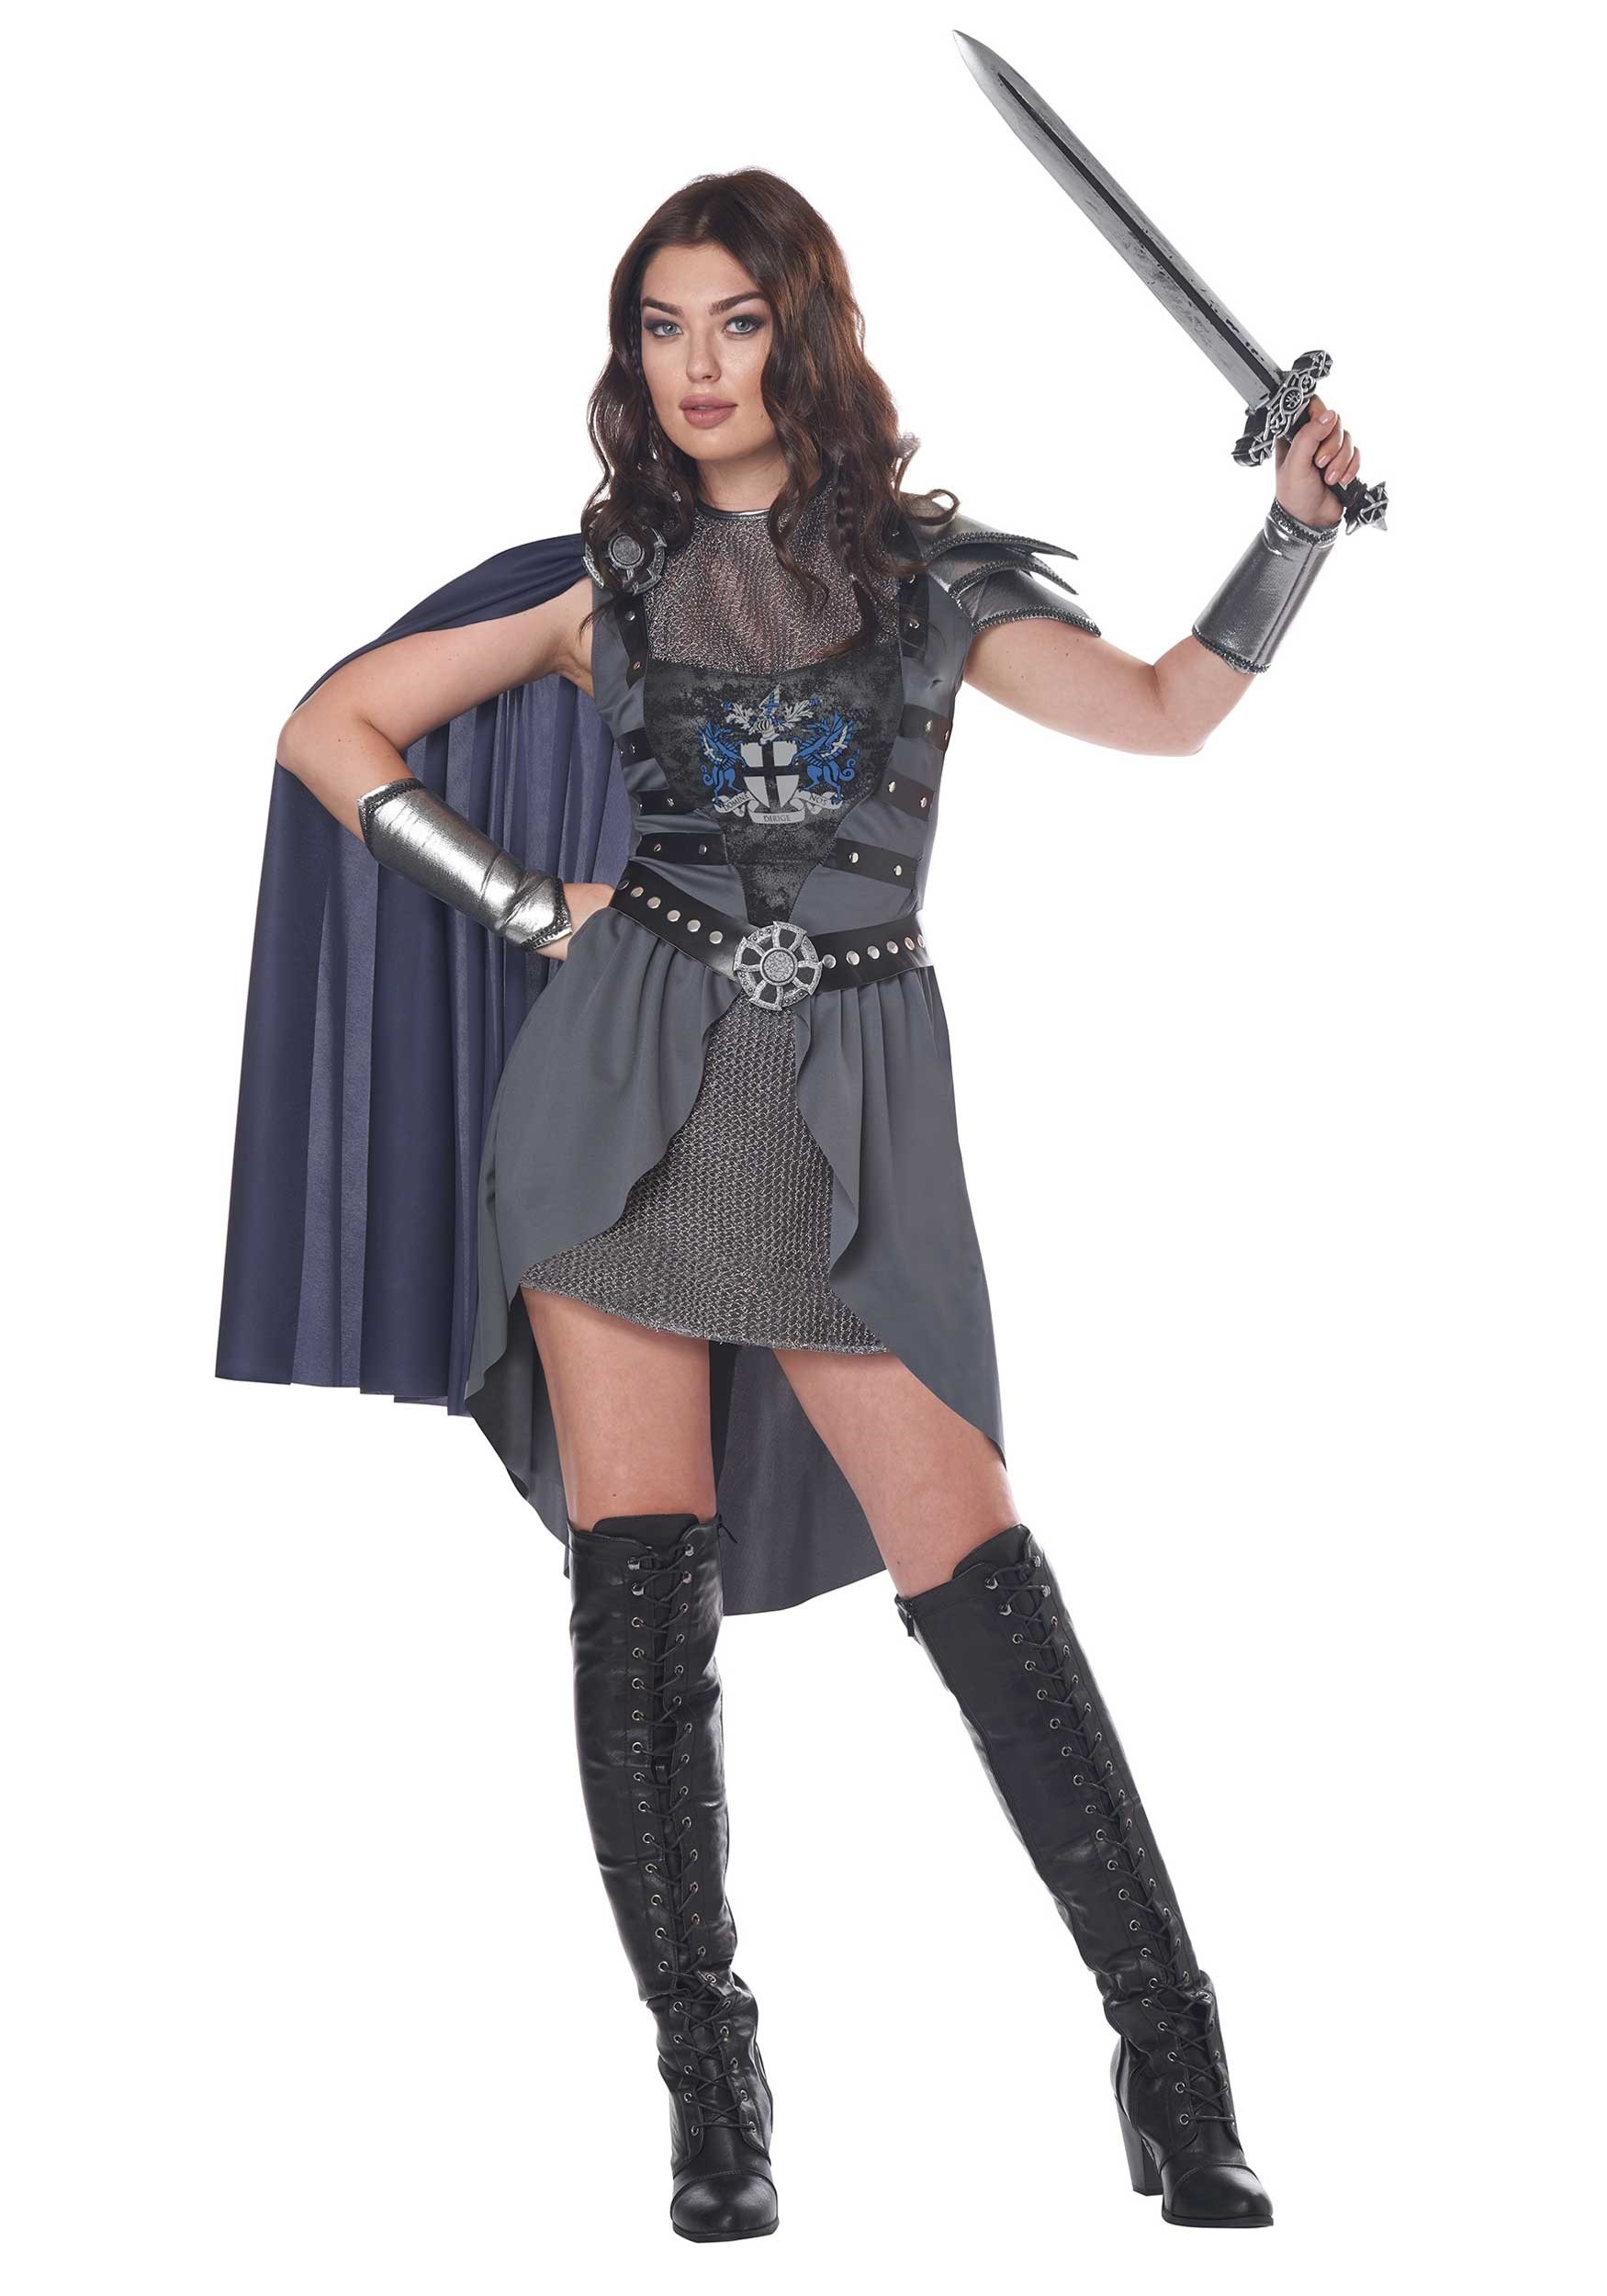 Photos - Fancy Dress California Costume Collection Lady Knight Costume for Women Blue/Gray 